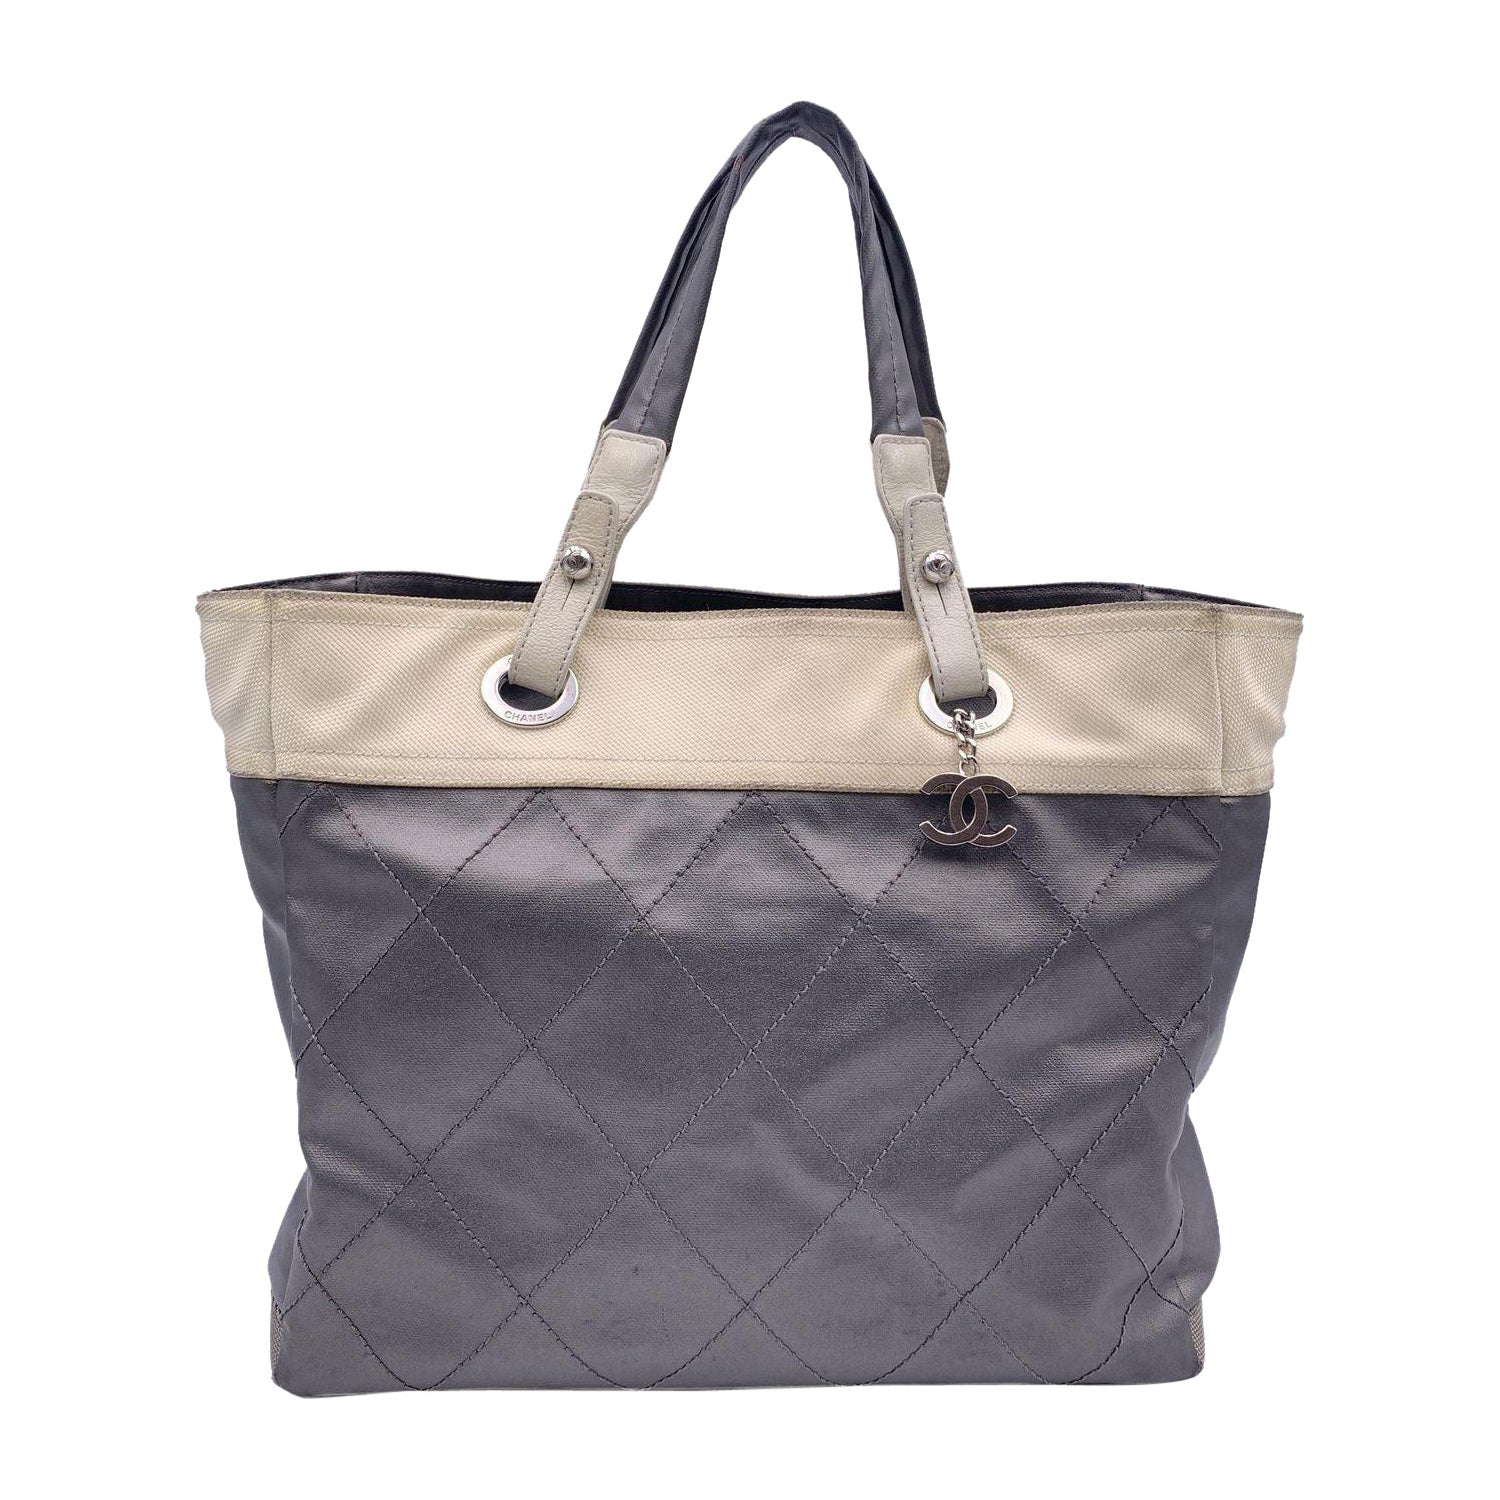 Chanel Gray Metallic Quilted Canvas Paris Biarritz Tote Bag For Sale